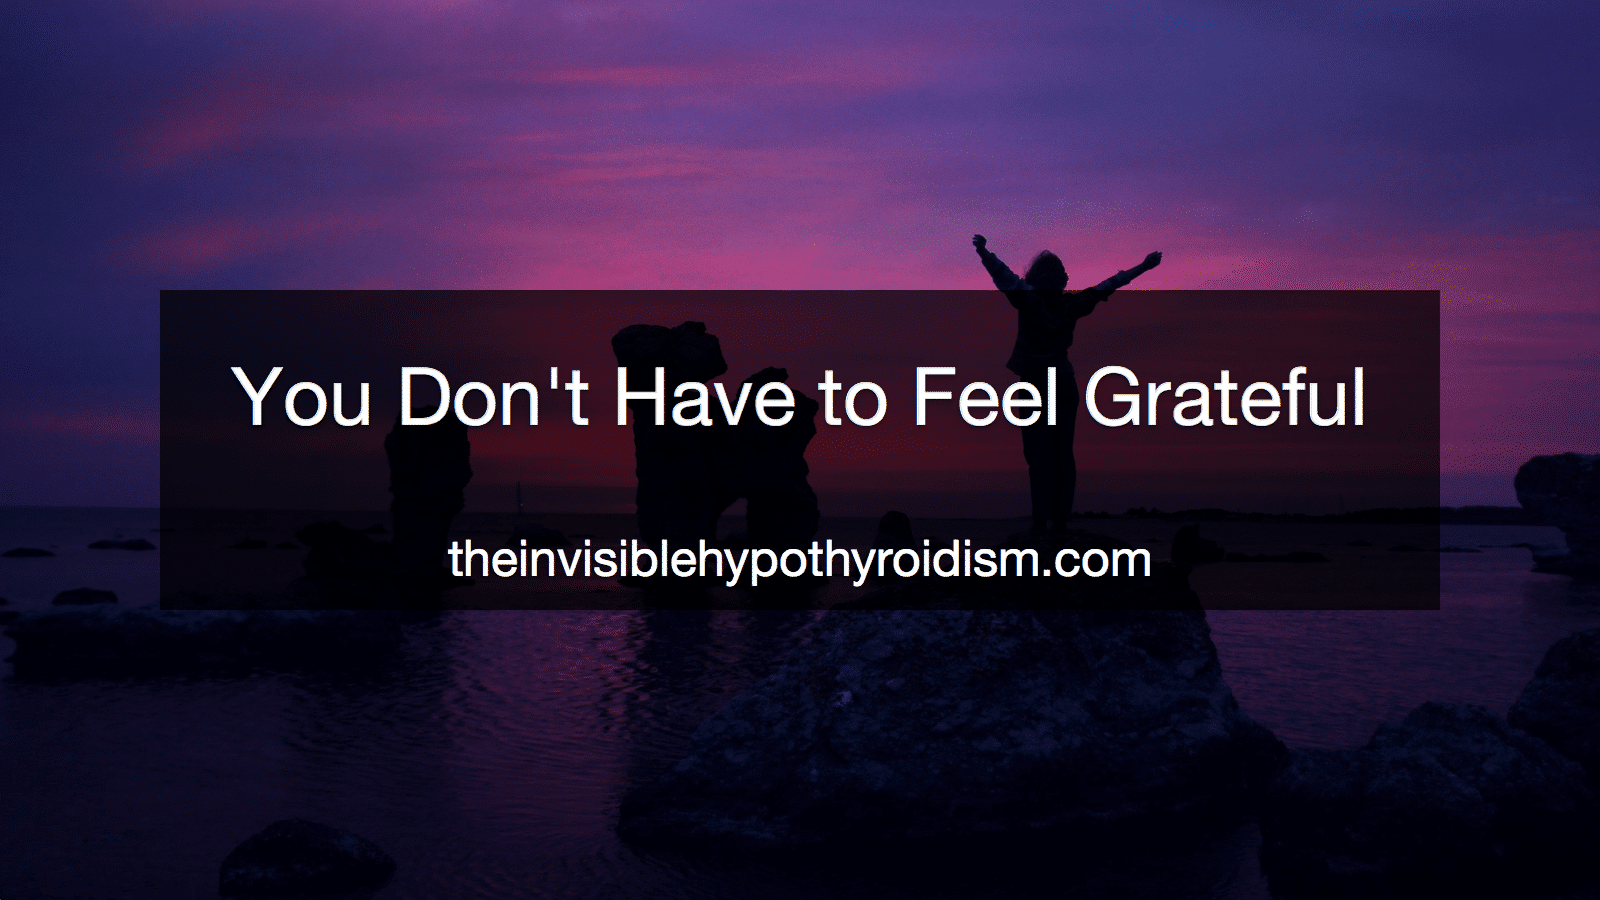 You Don't Have to Feel Grateful